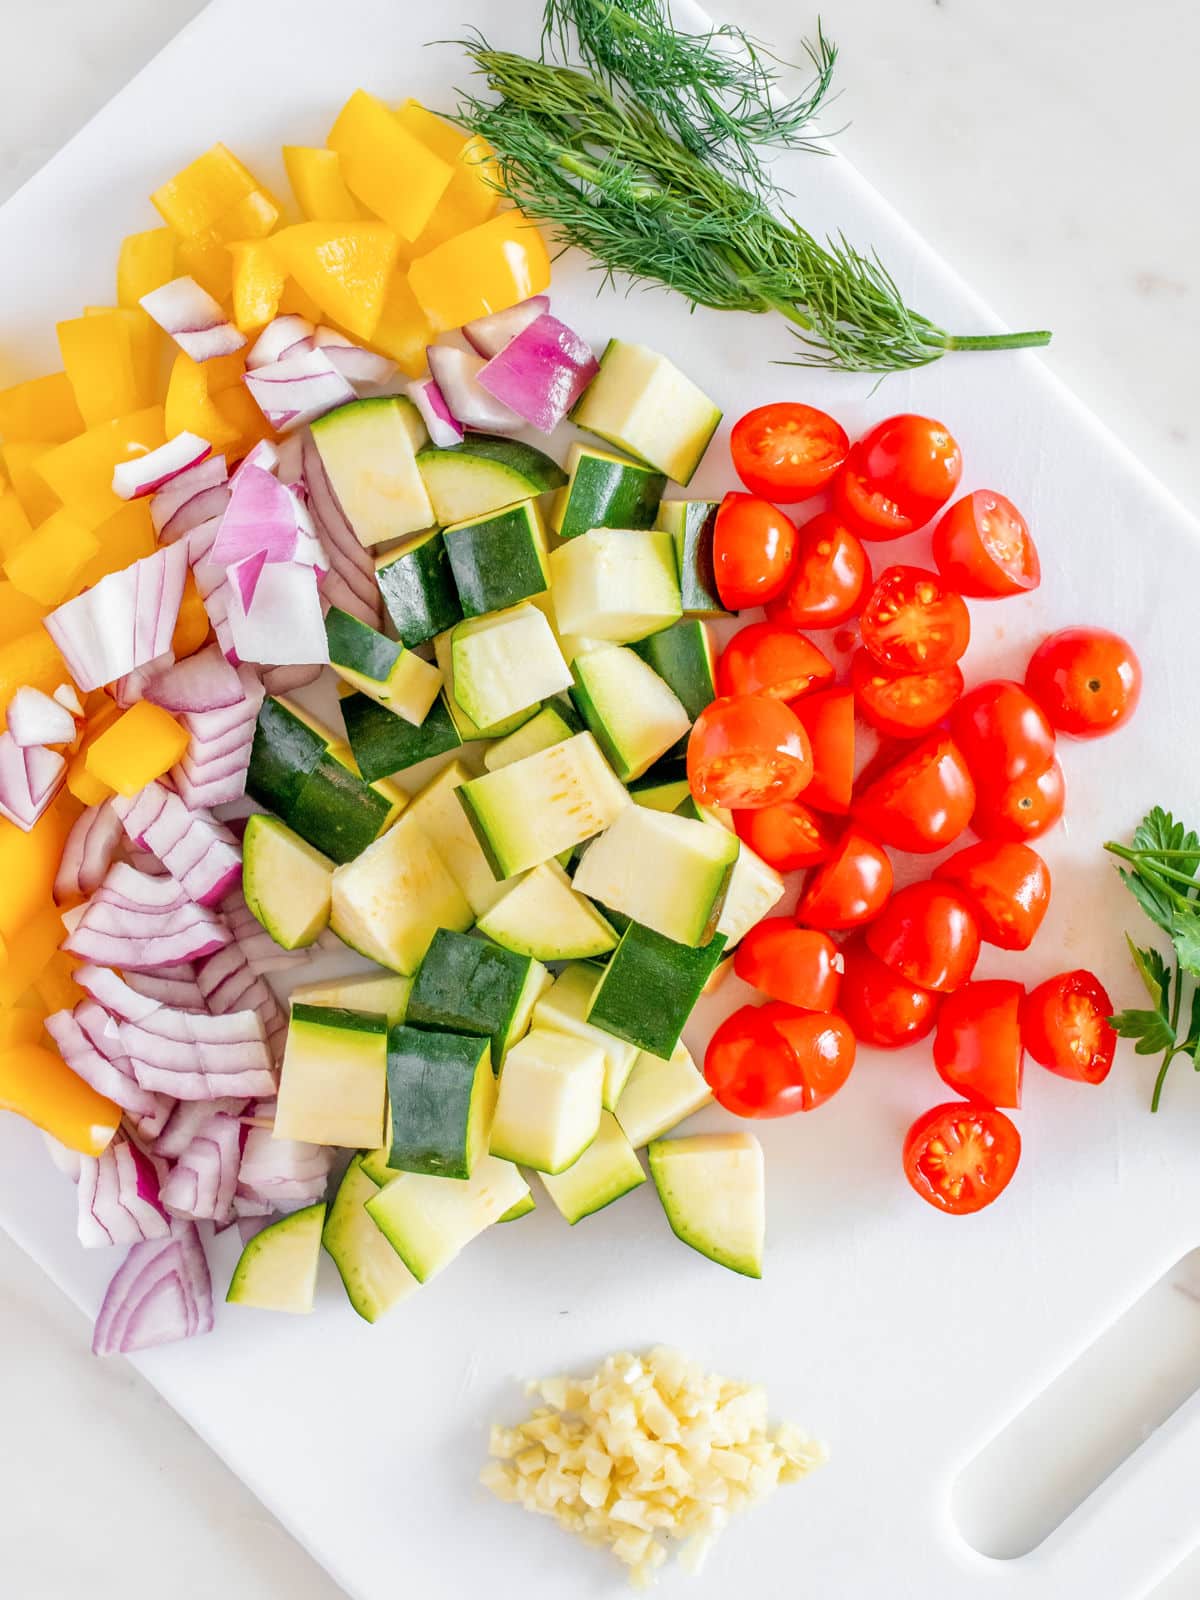 Assorted chopped vegetables on a cutting board, ready for cooking or salad preparation.